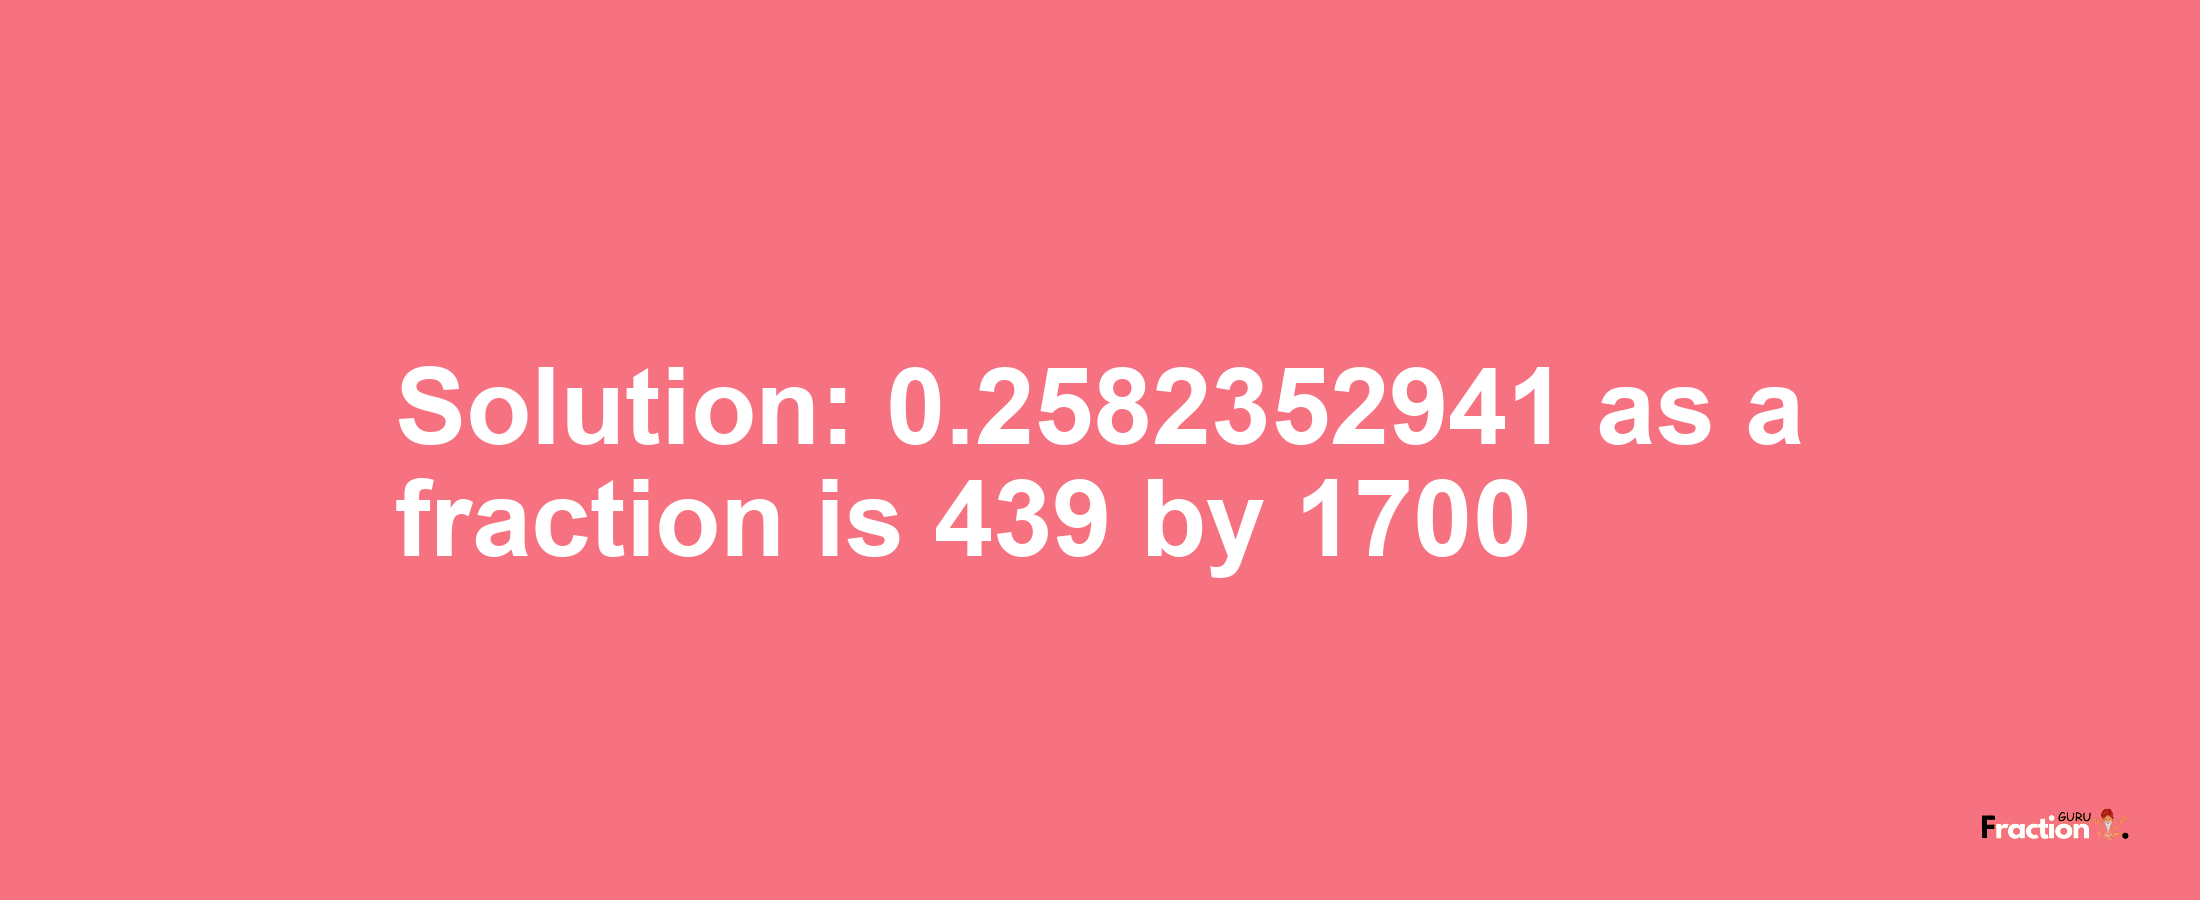 Solution:0.2582352941 as a fraction is 439/1700